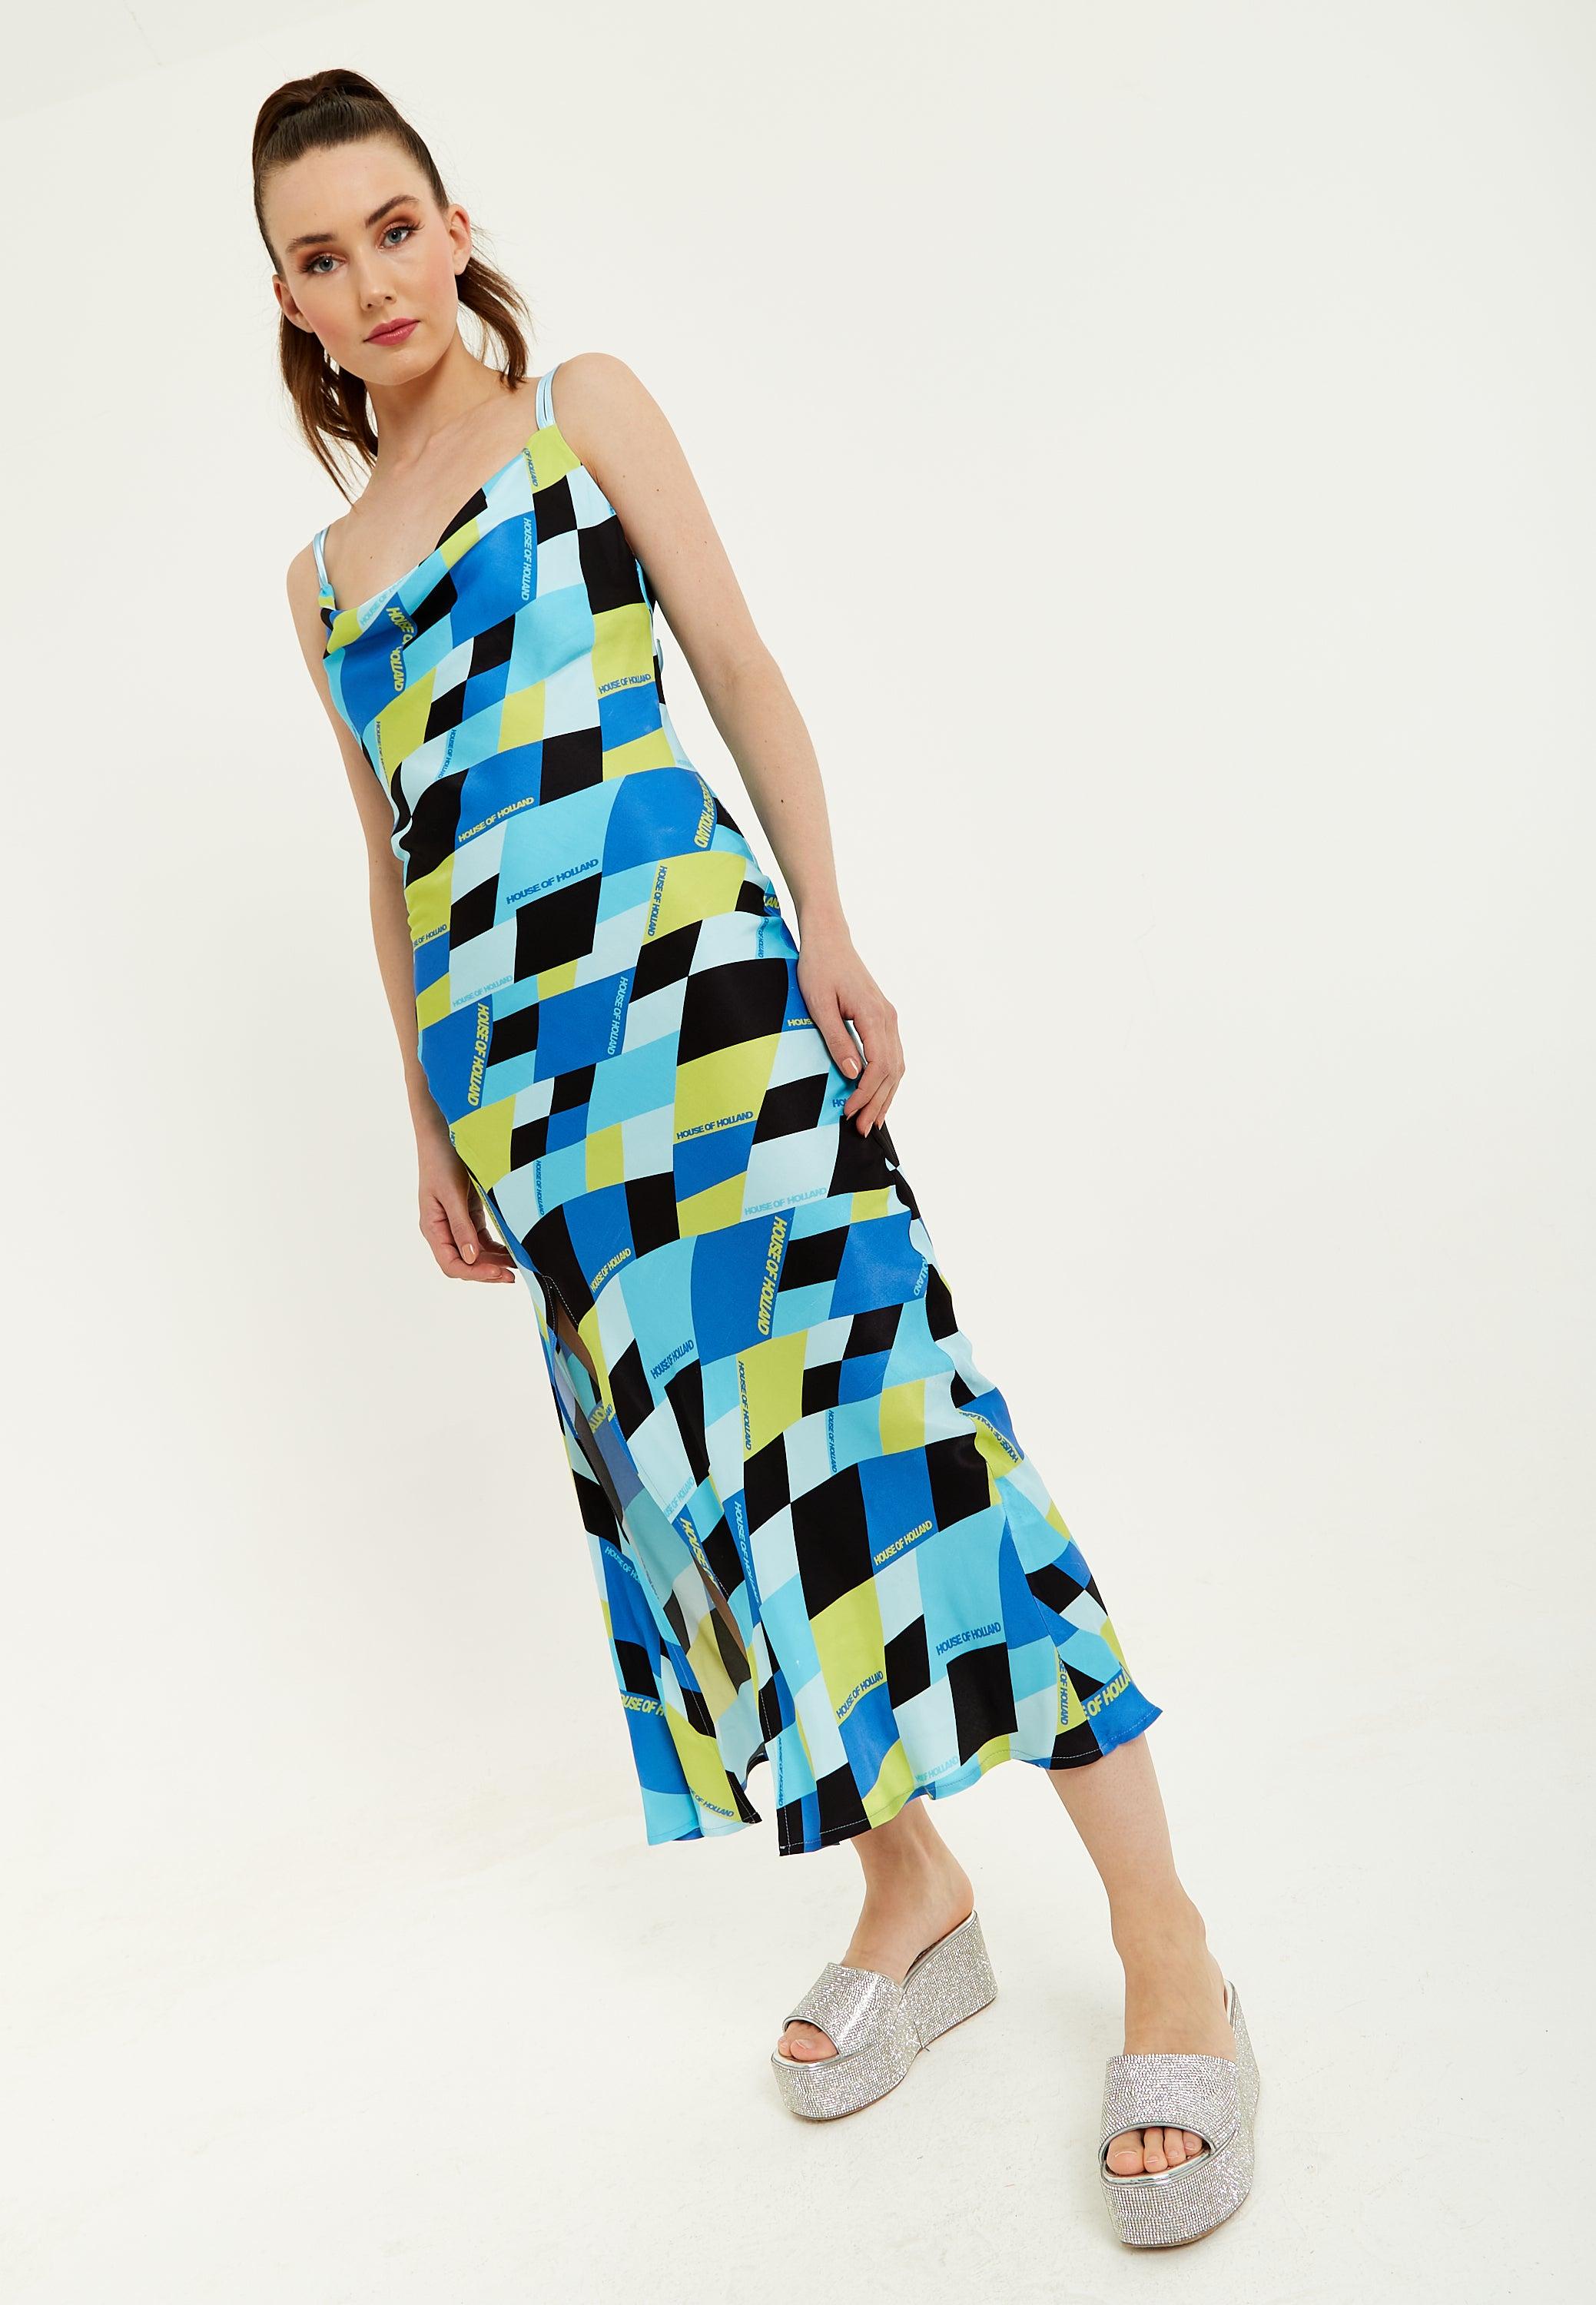 House of Holland Blue And Black Printed Midi Dress With Cowl Neck | Lyst